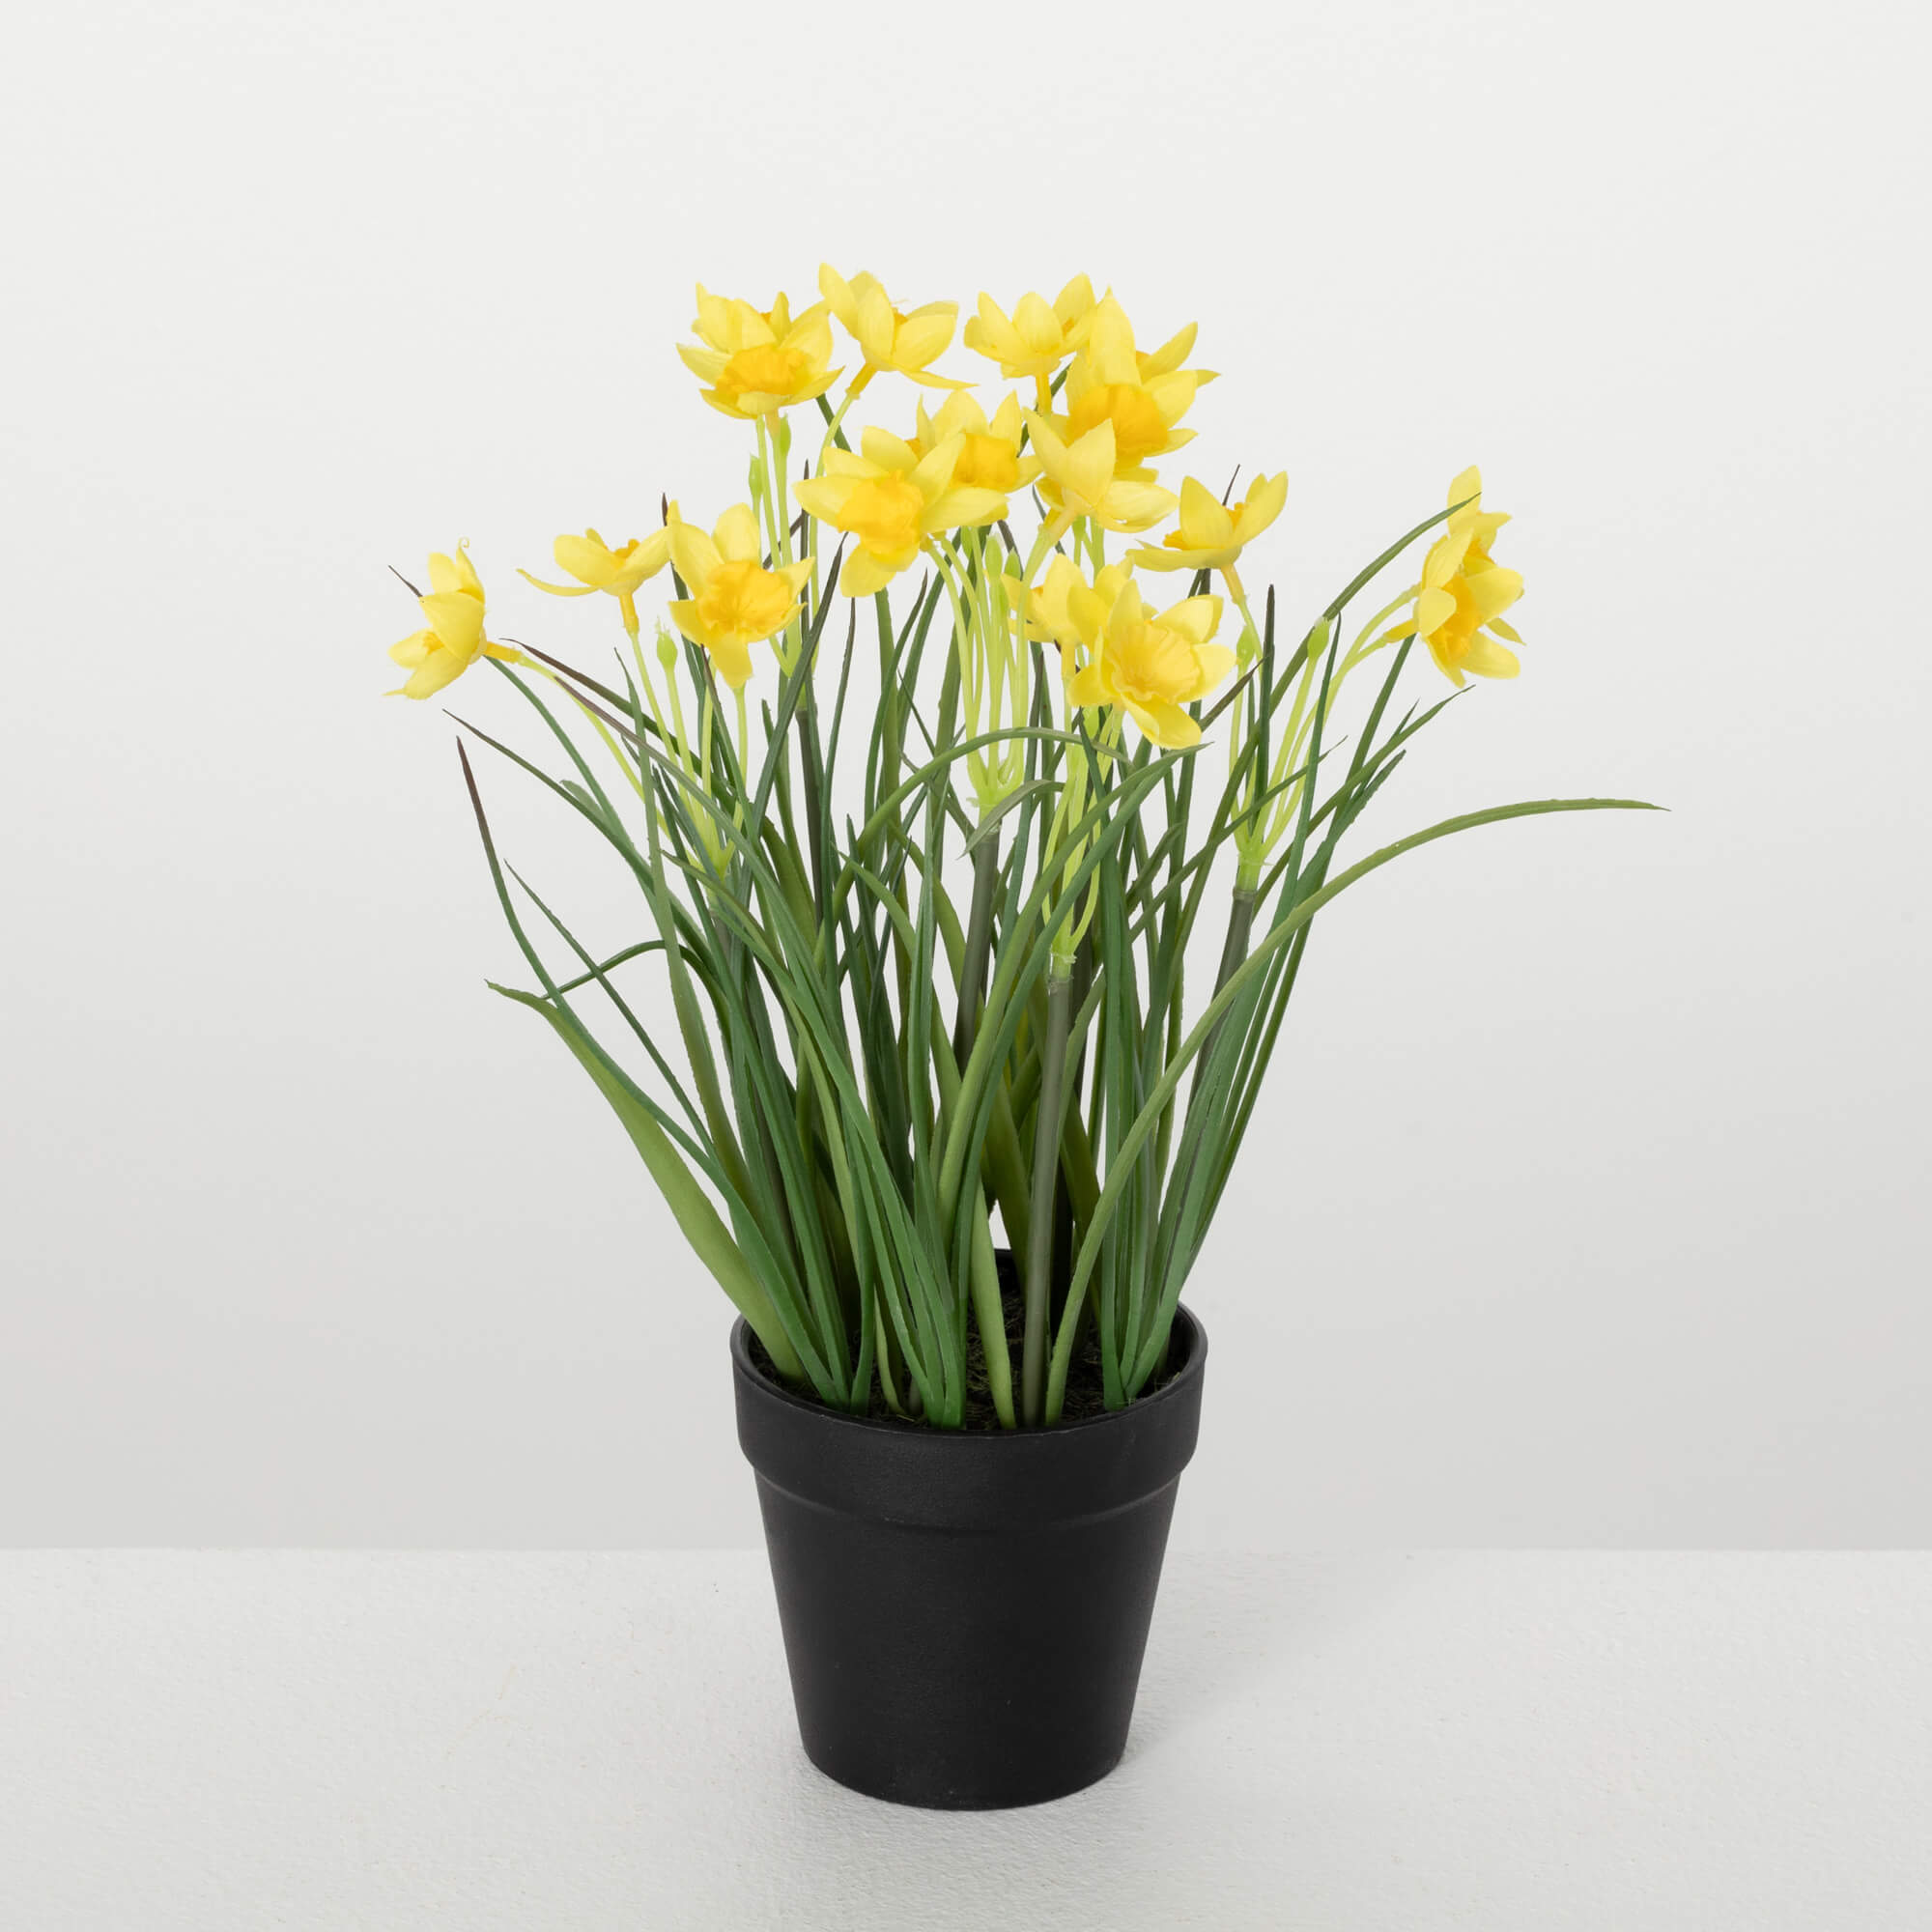 POTTED DAFFODIL